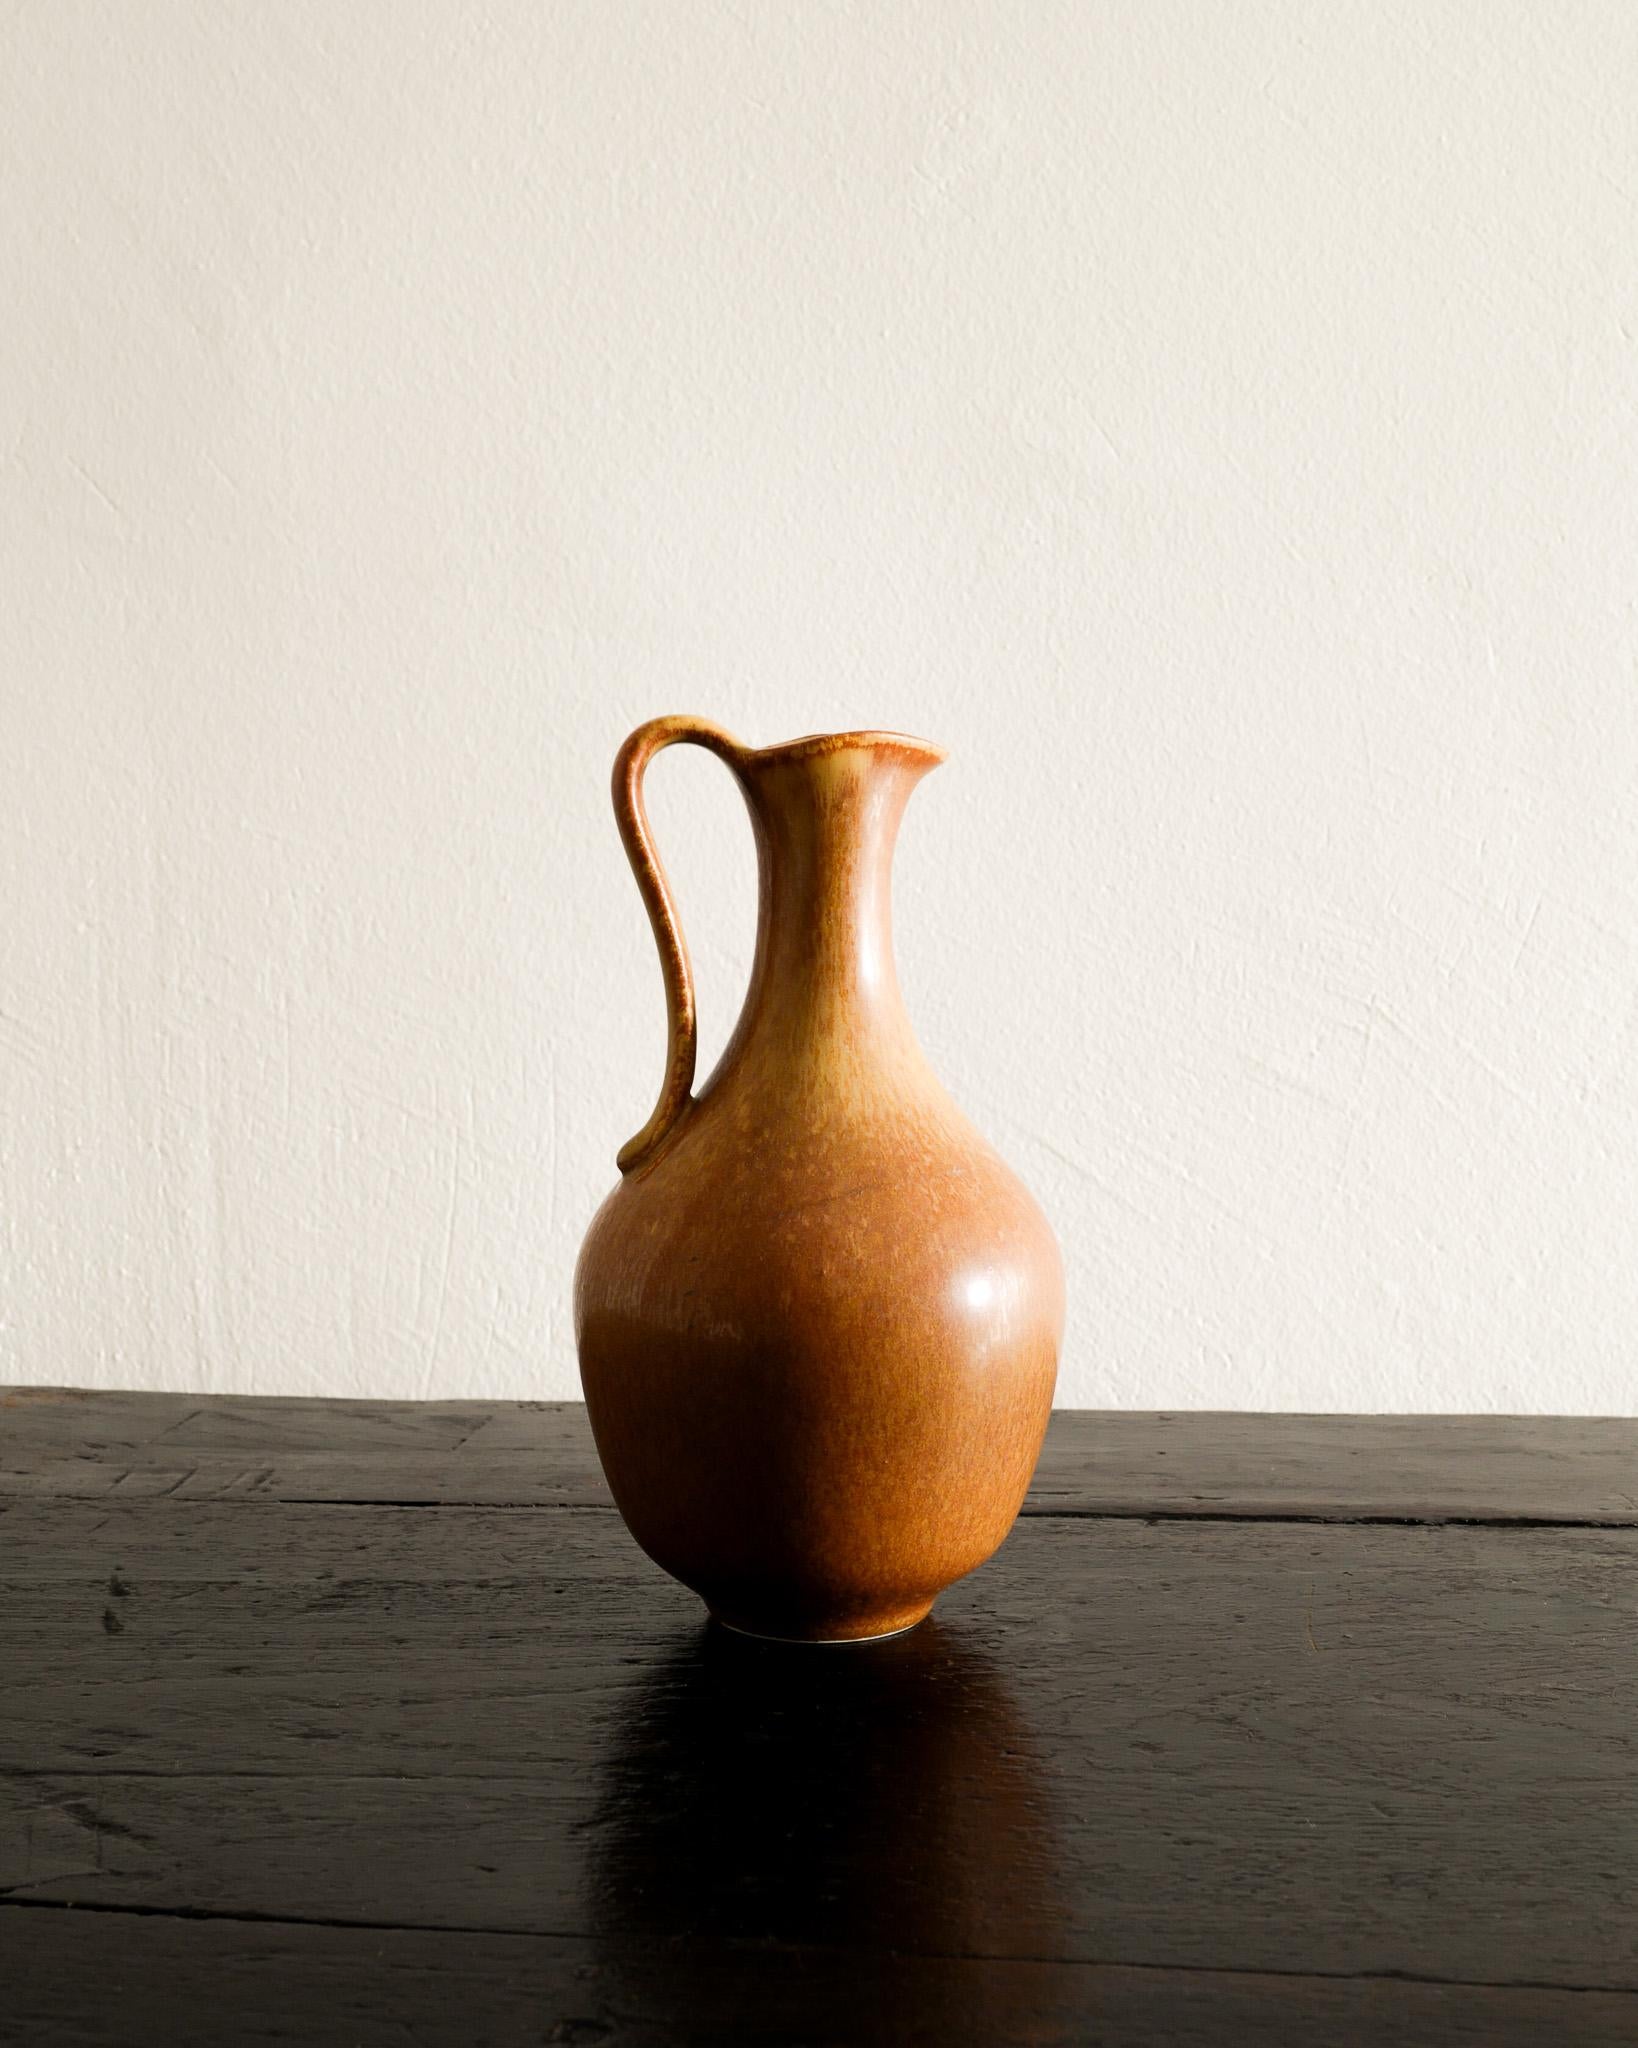 Rare brown mid century ceramic pitcher by Gunnar Nylund for Rörstrand, Sweden 1950s. In good vintage condition with some signs from age and use. Signed and numbered. 

Dimensions: H: 17 cm / 6.70